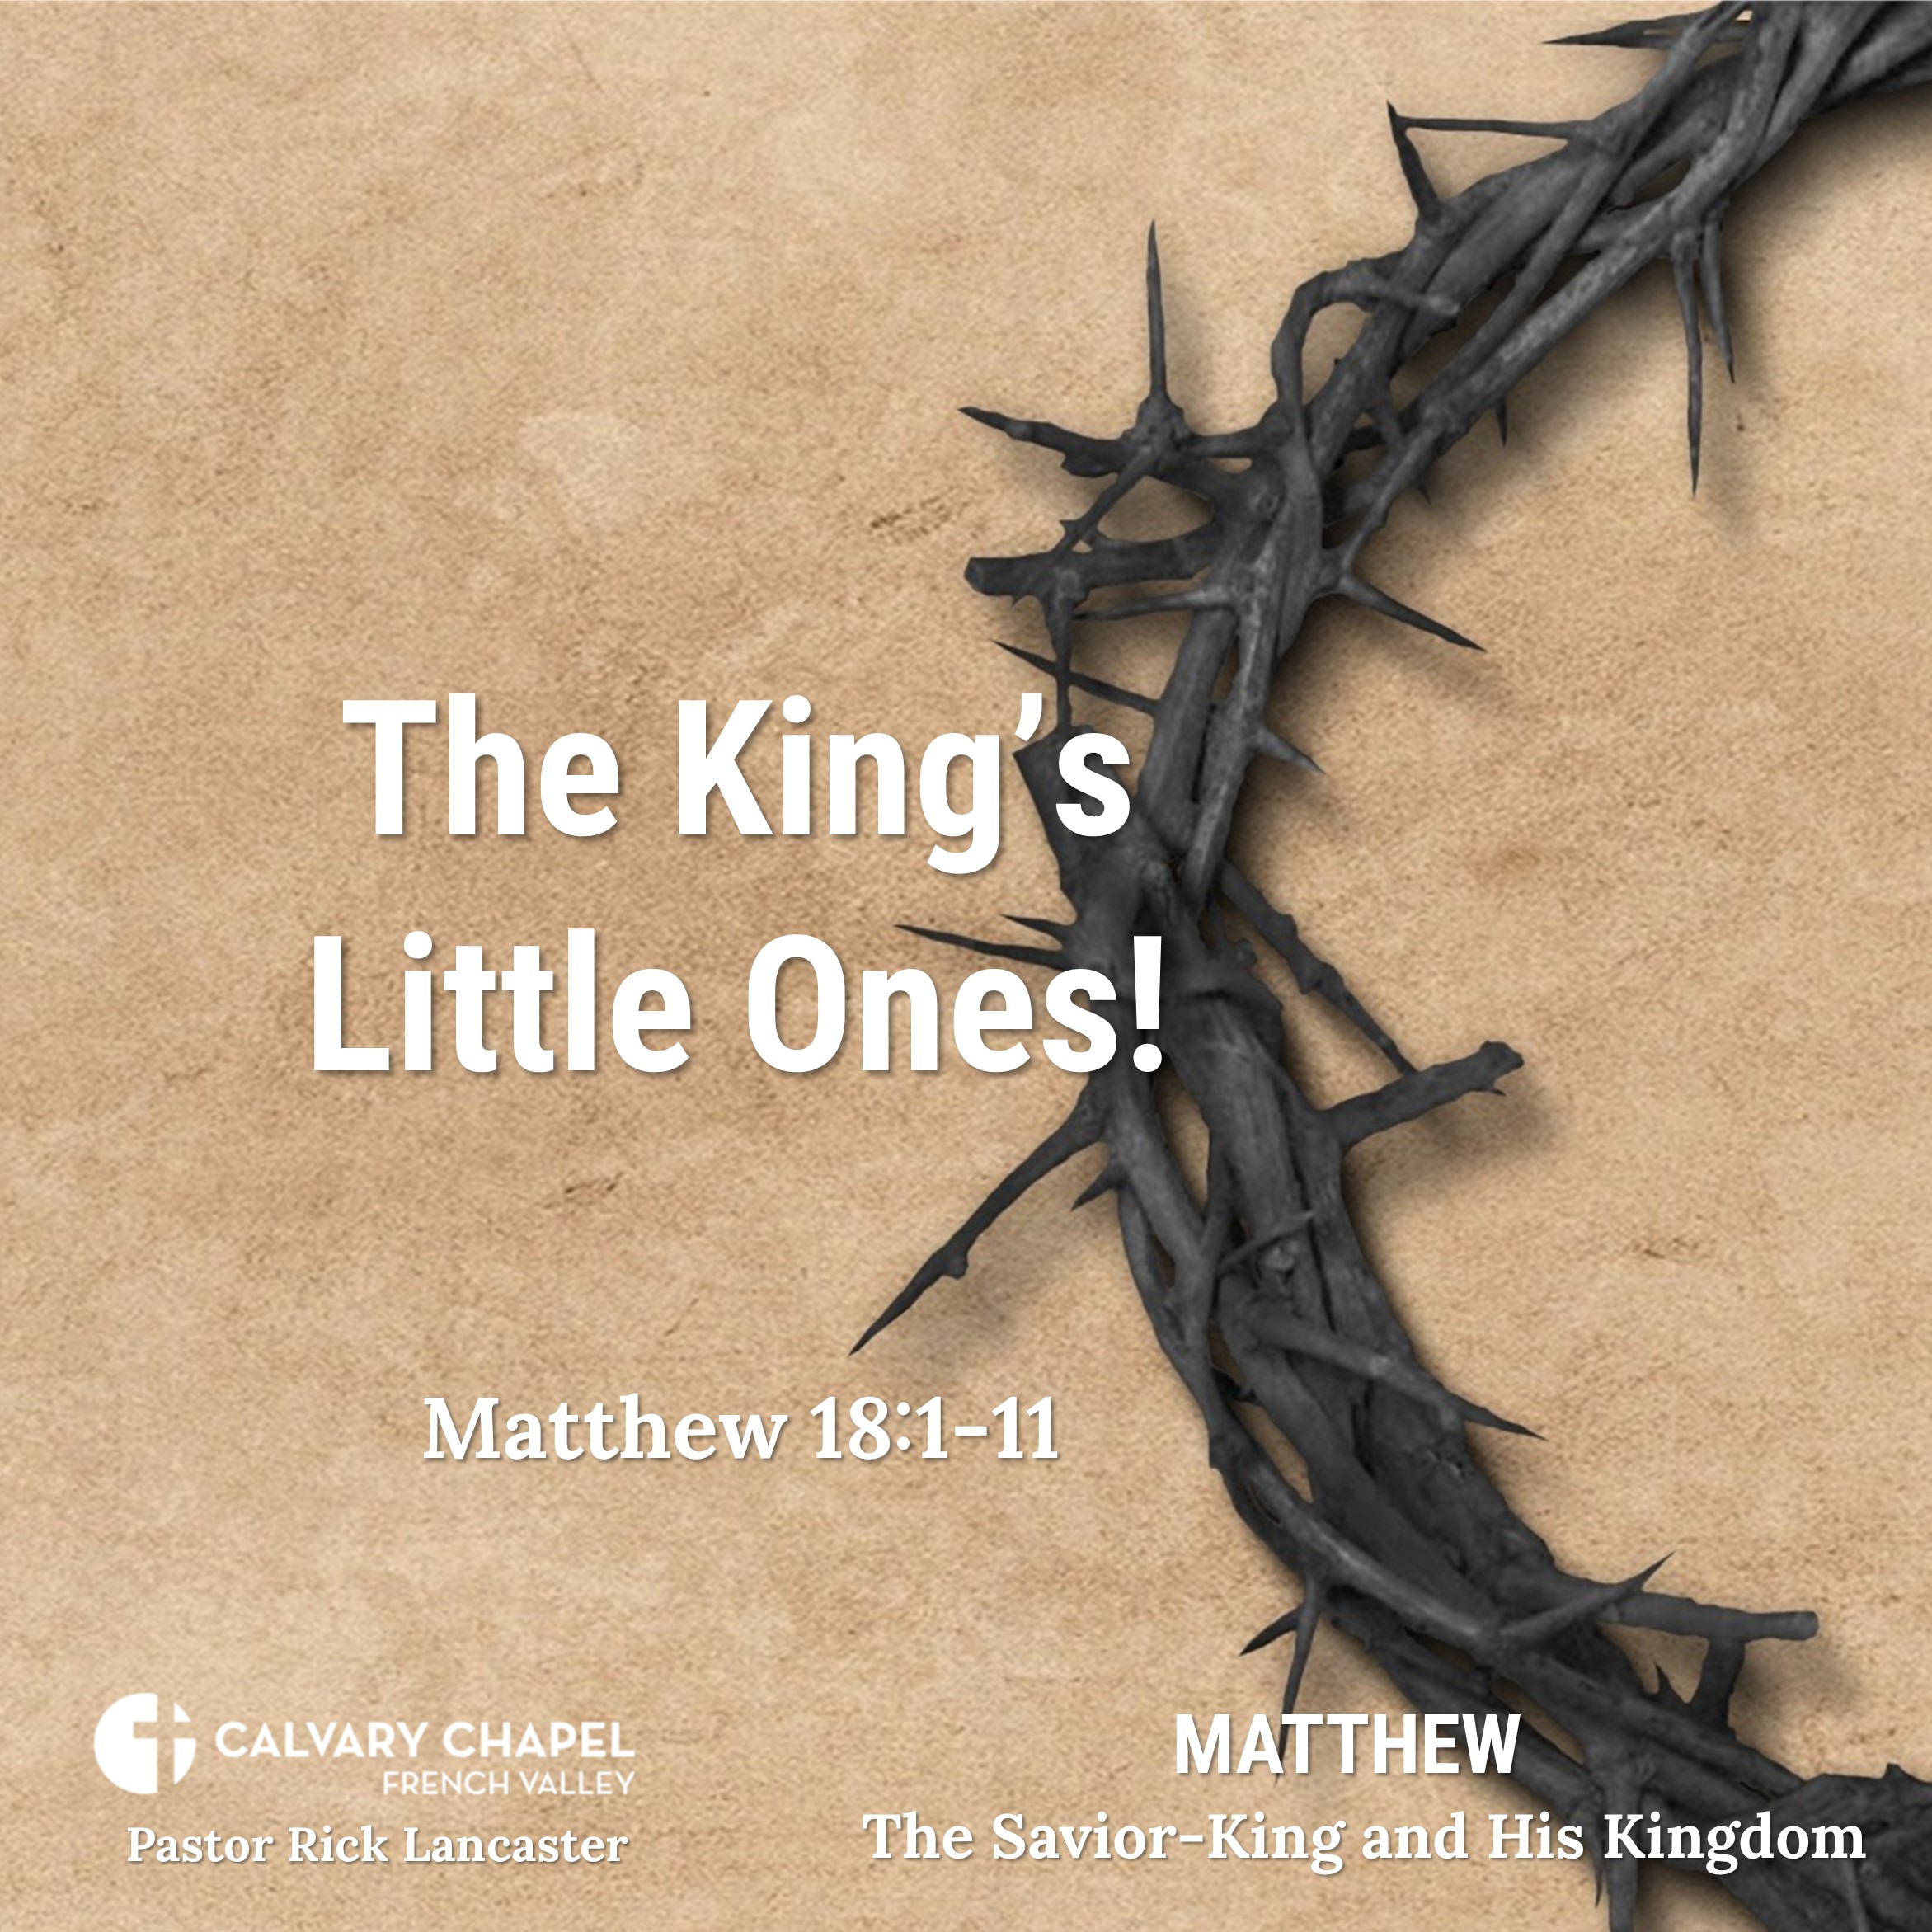 The King’s Little Ones! – Matthew 18:1-11 - Matthew: The Savior-King and His Kingdom